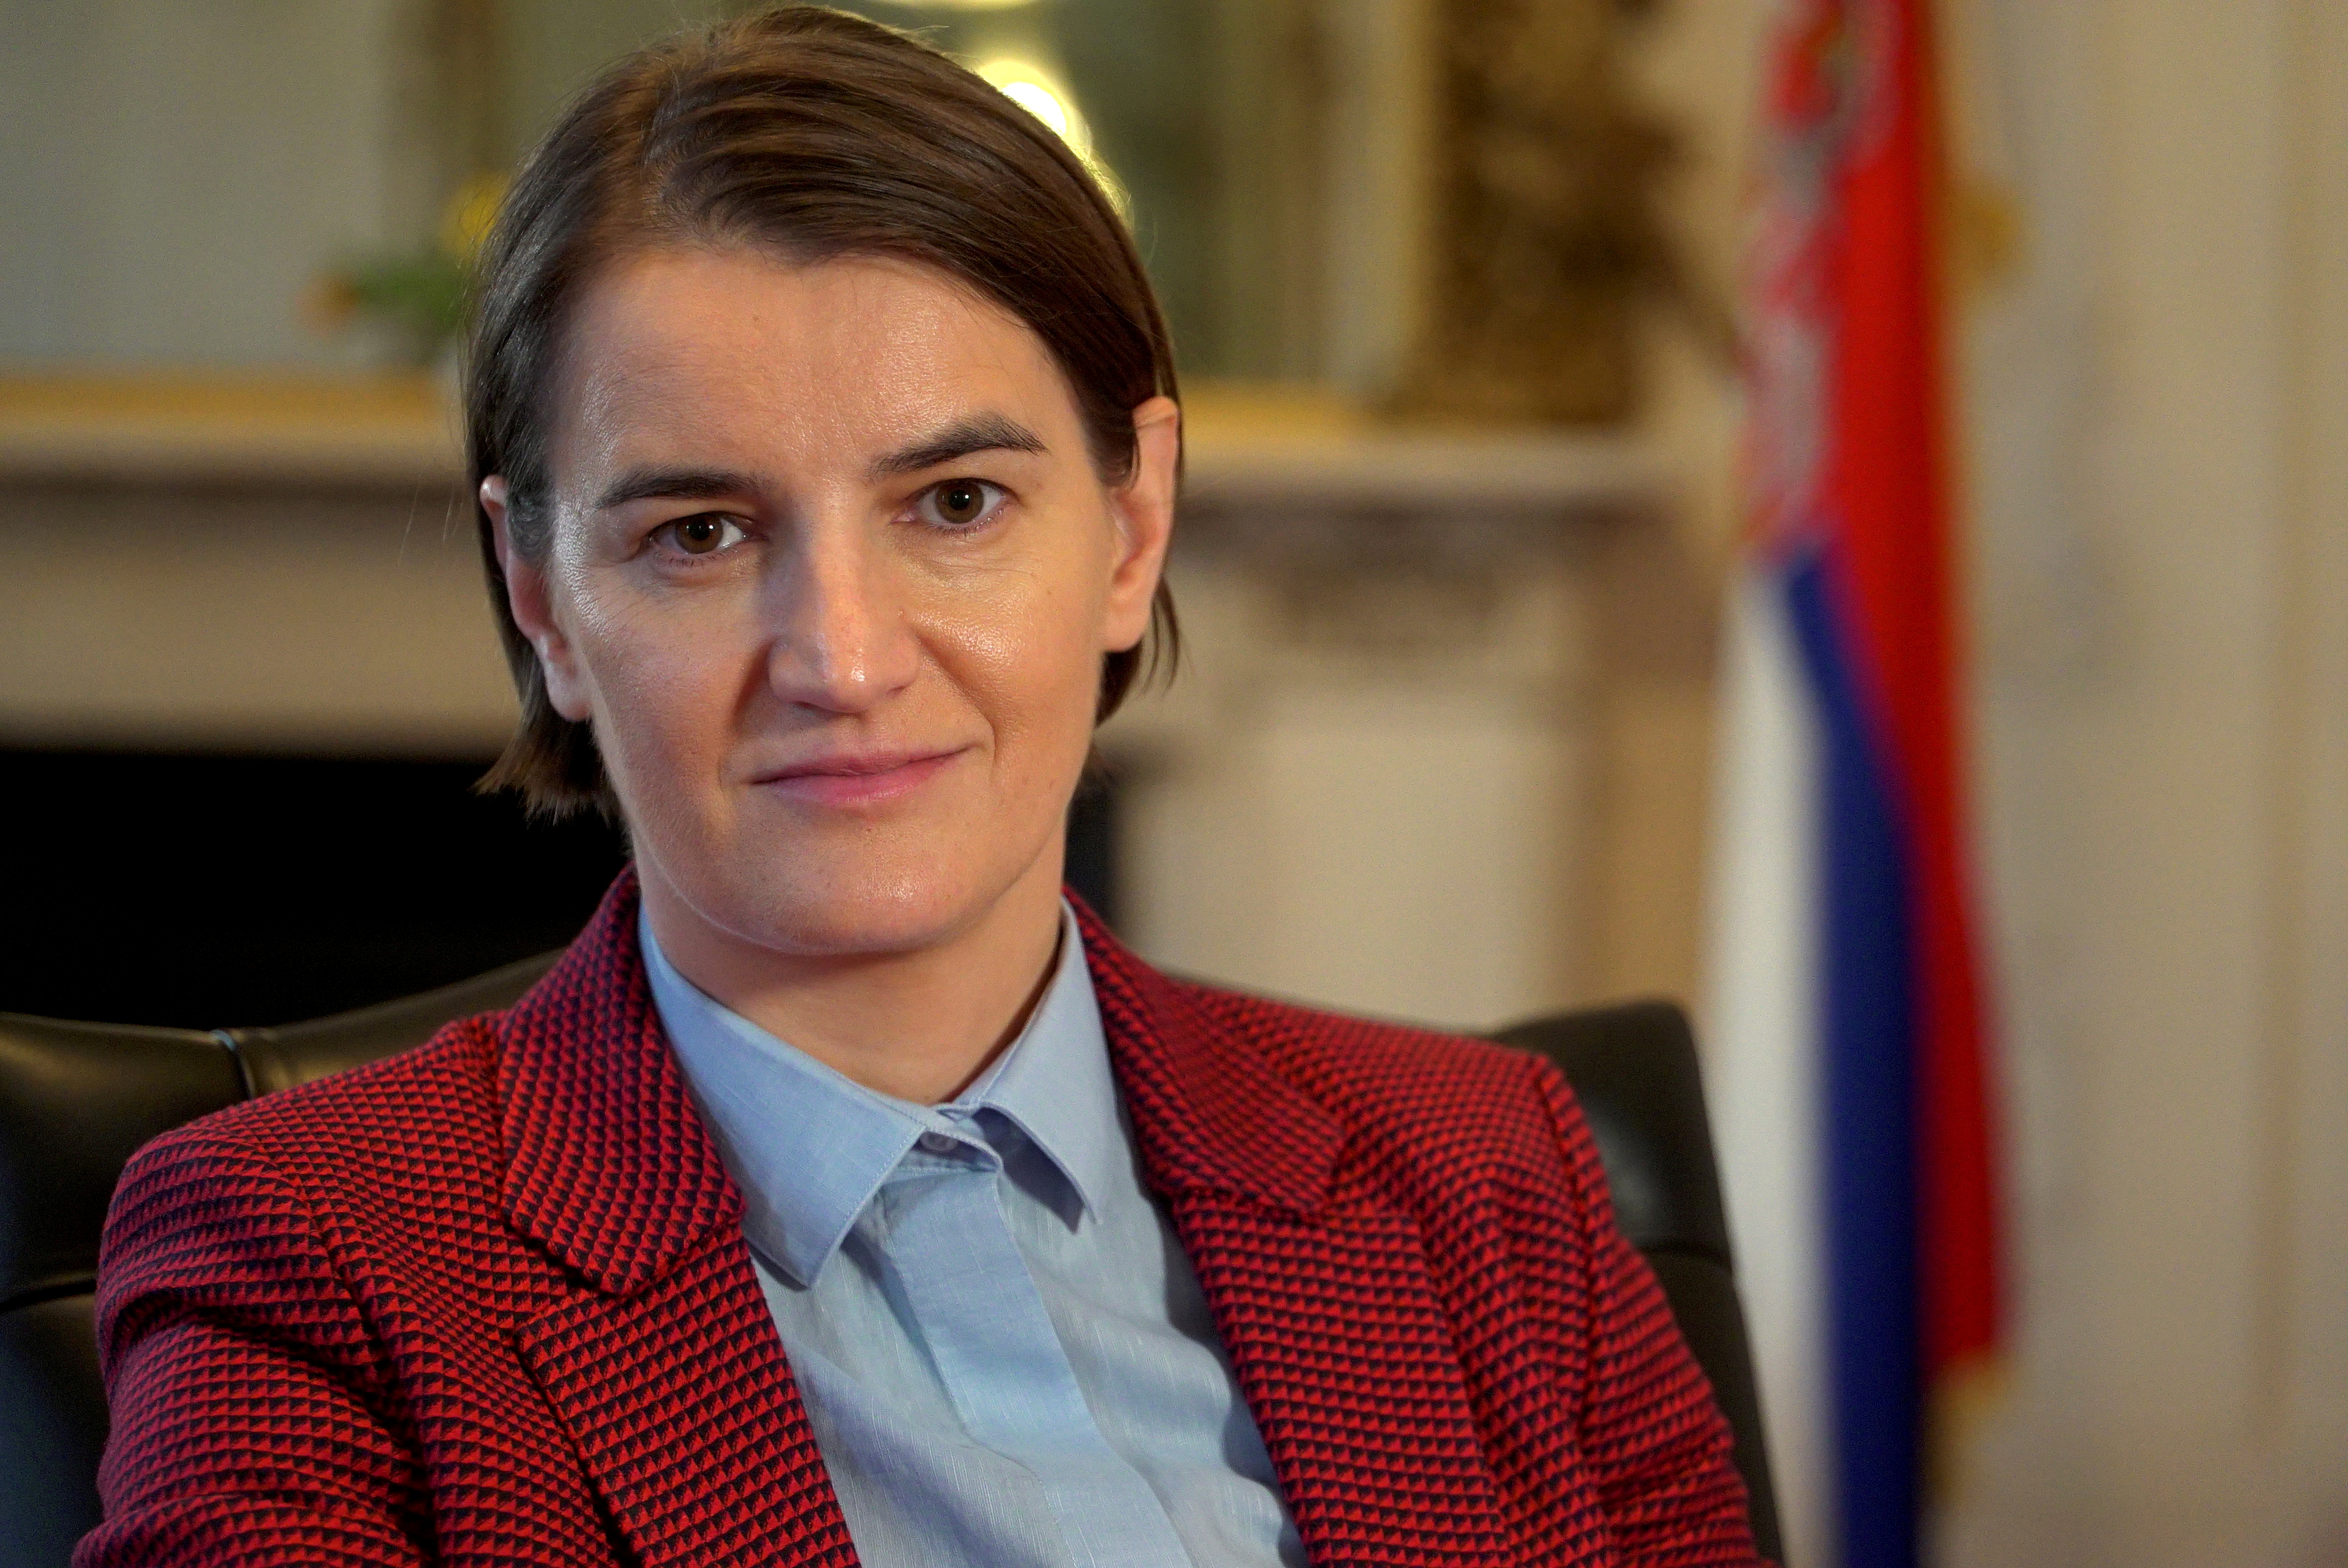 Serbia's Prime Minister Ana Brnabic poses for a portrait after an interview at Serbia's Embassy in London, Britain, February 25, 2018. REUTERS/Will Russell/File Photo